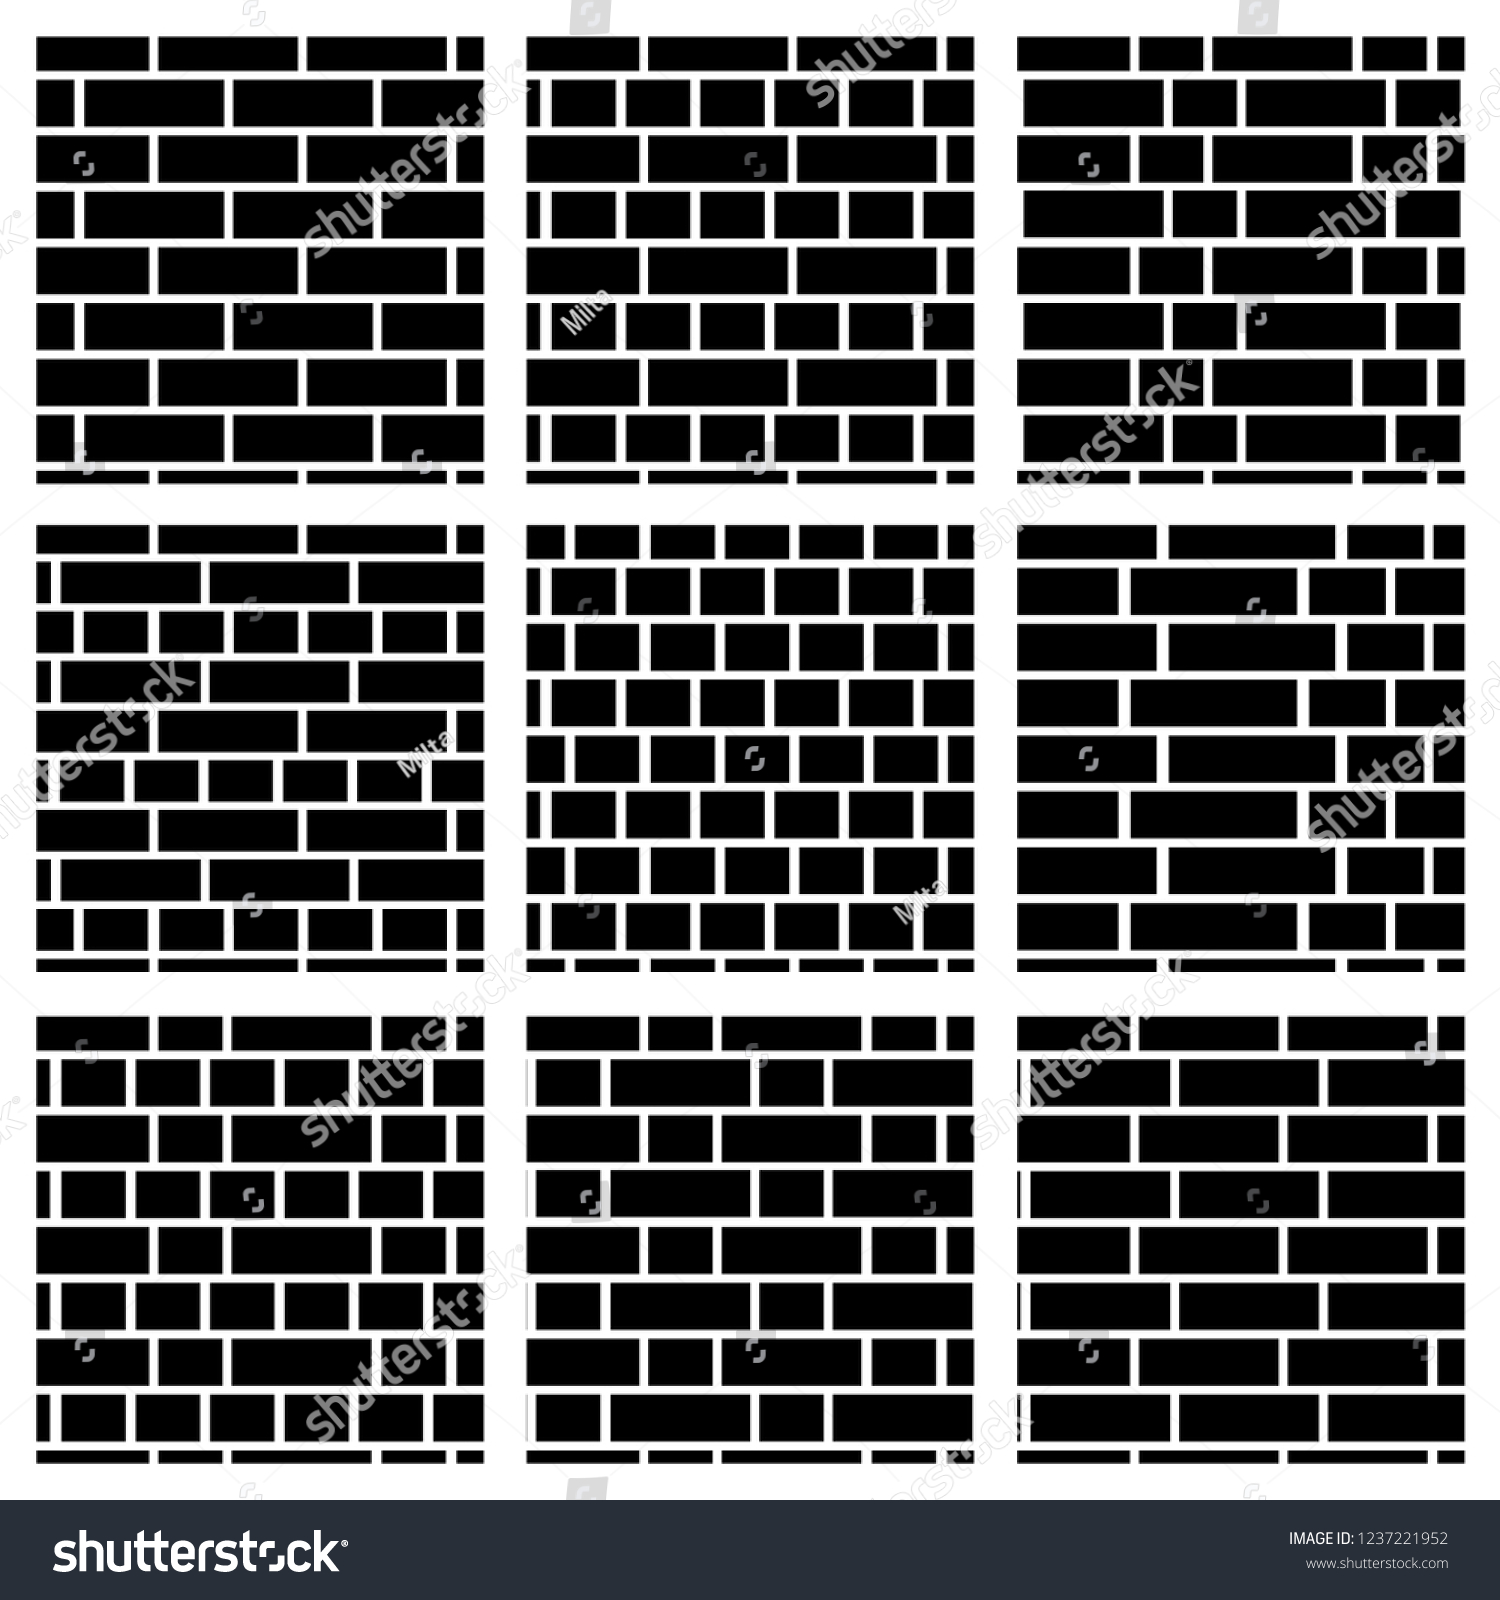 types of bricklaying